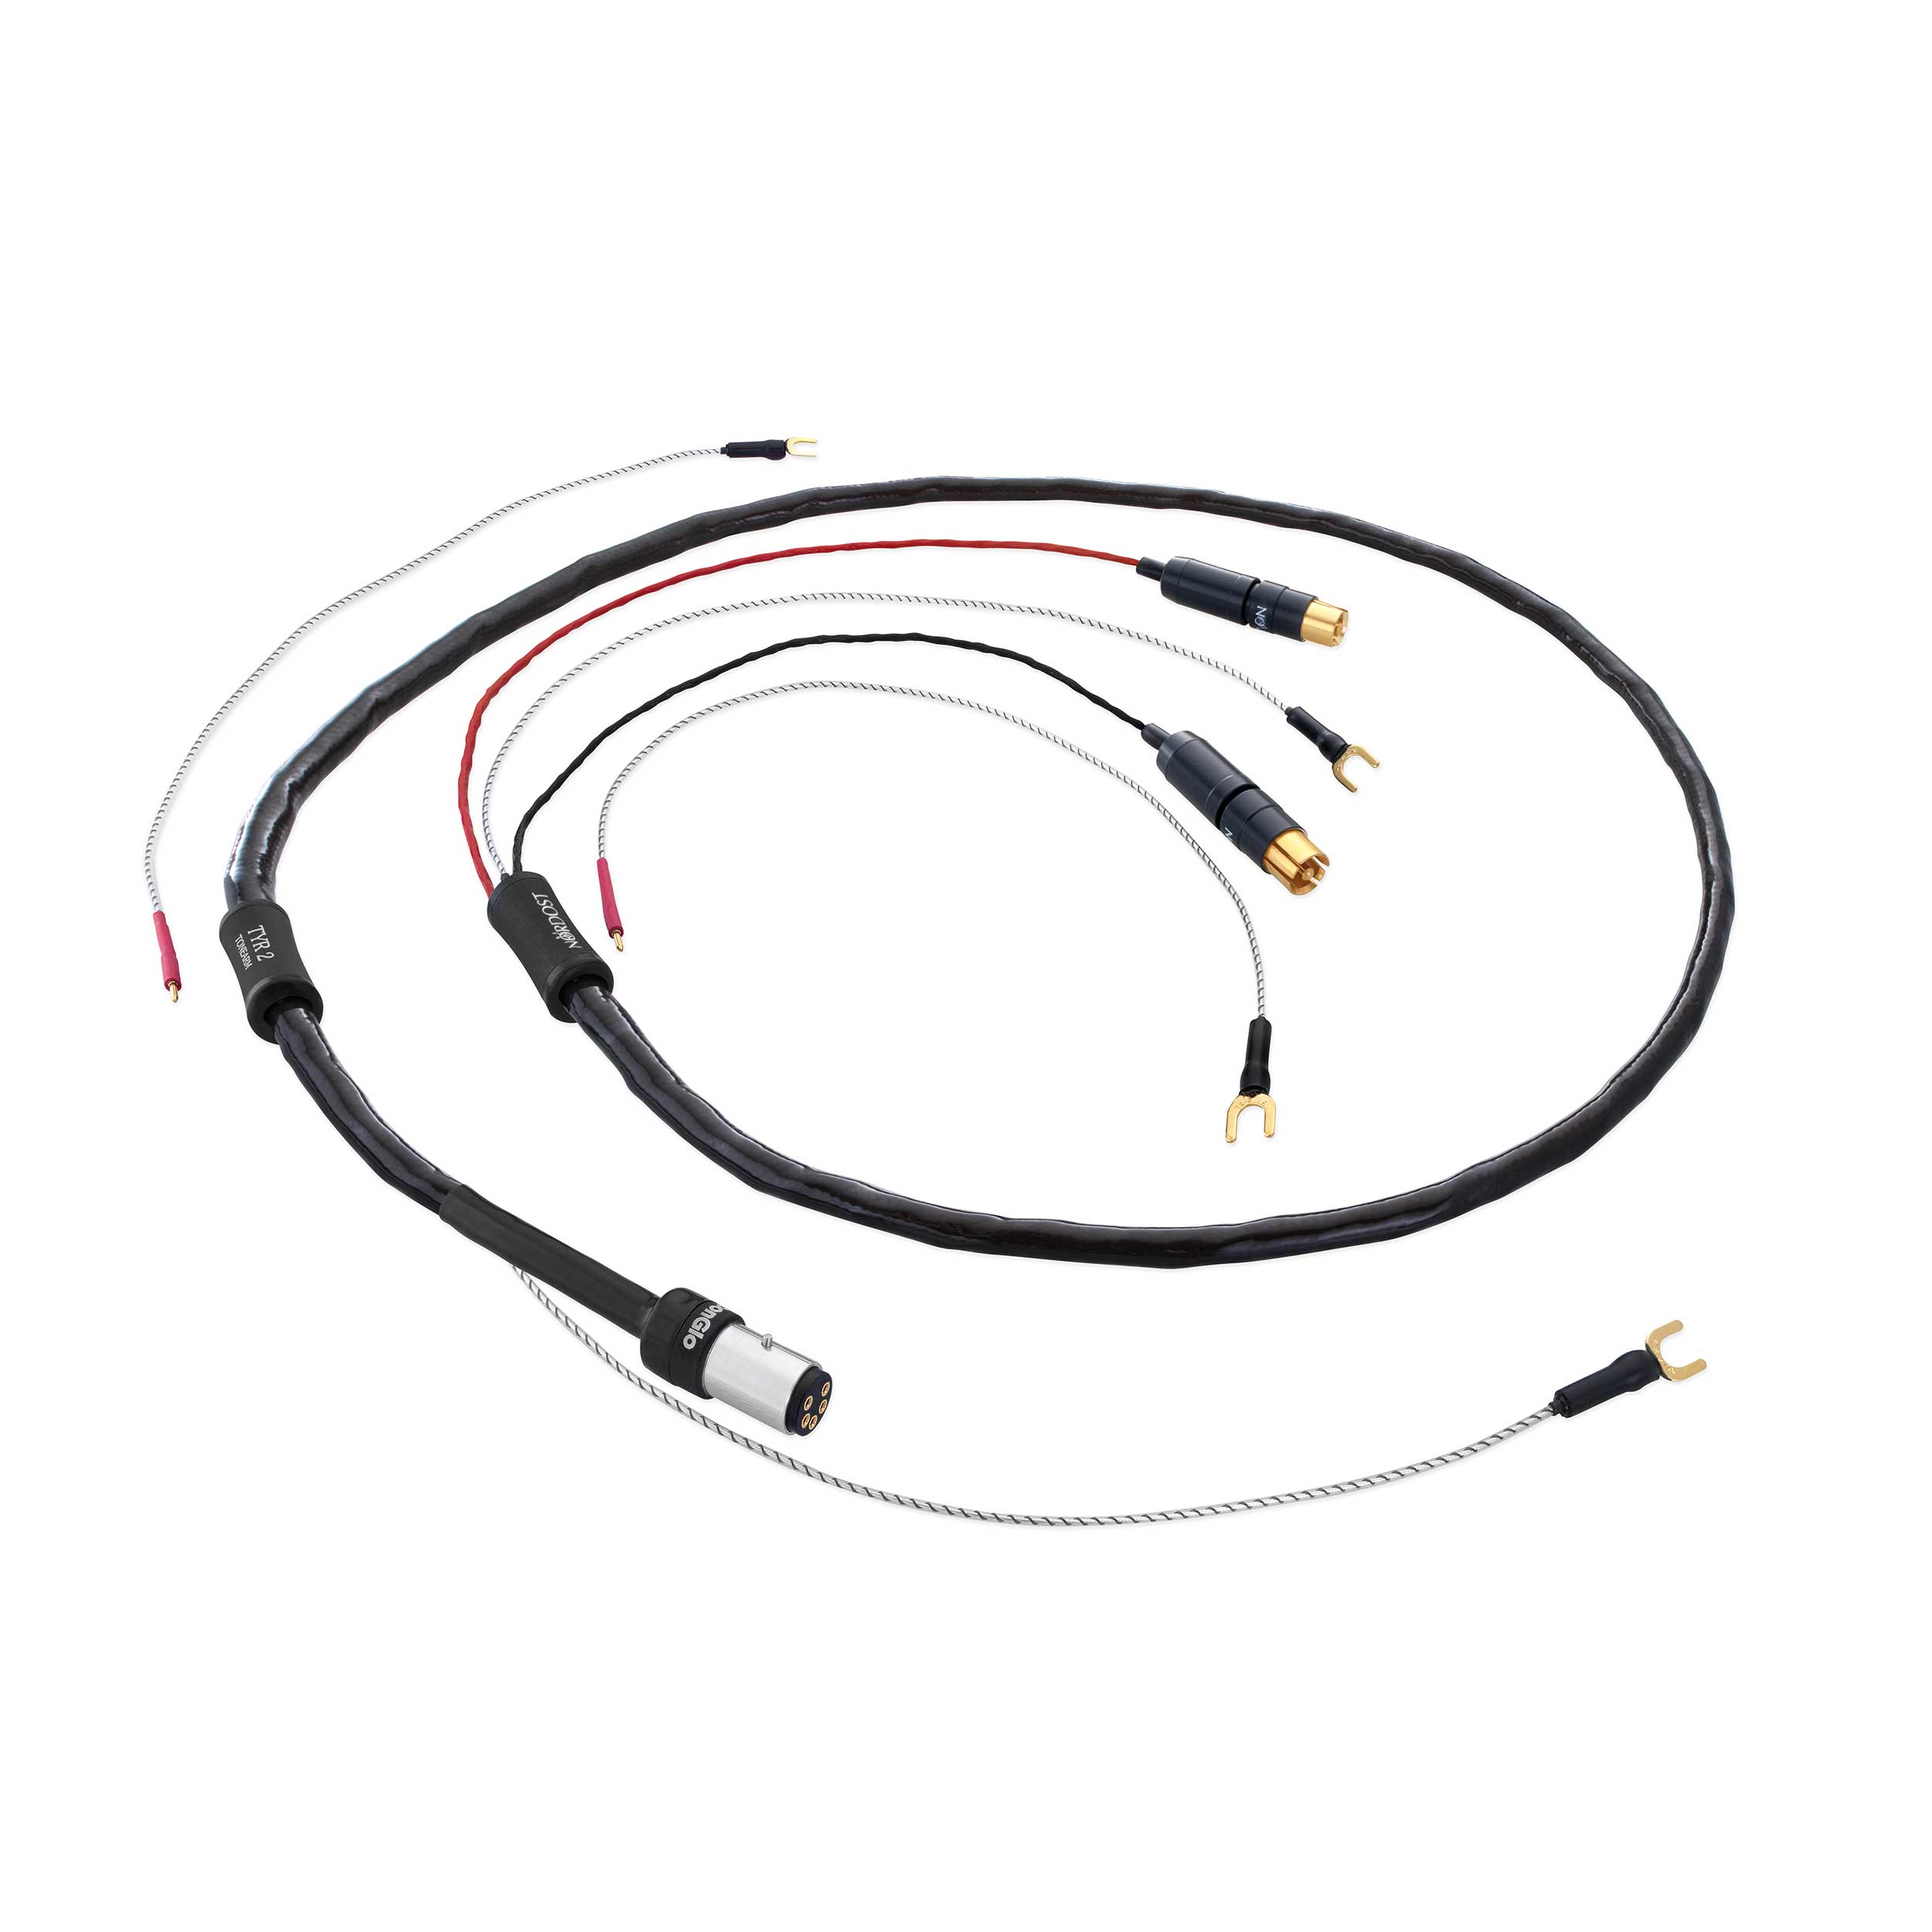 Tyr 2 Tonearm Cable